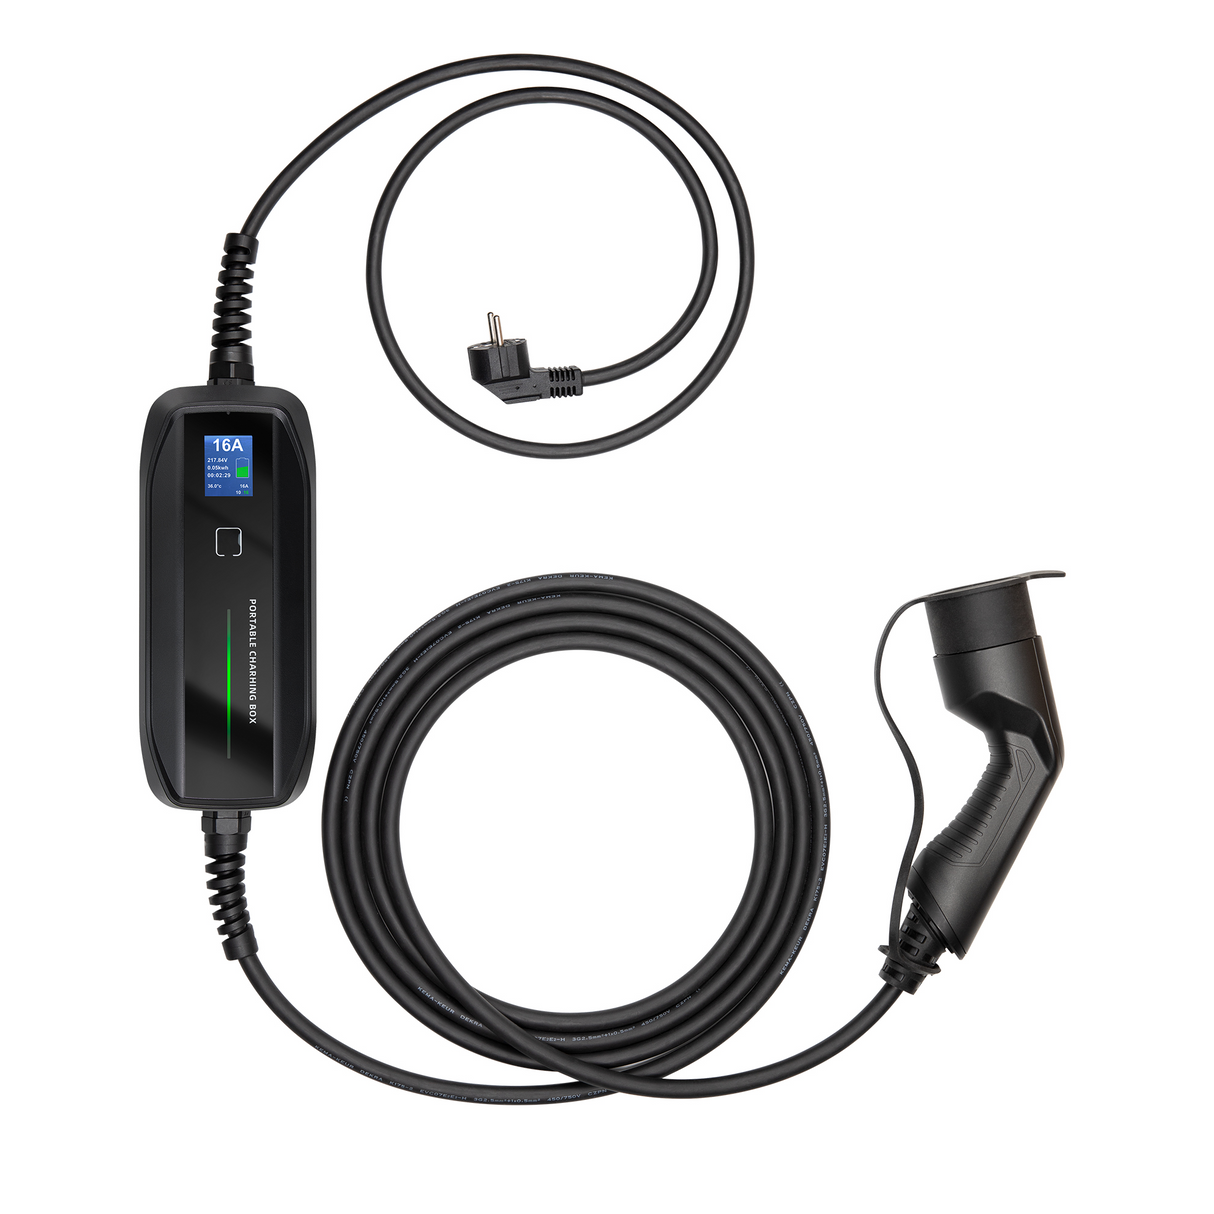 Charger mobile Vinfast VF 8 - Amis de LCD - Type 2 à Schuko